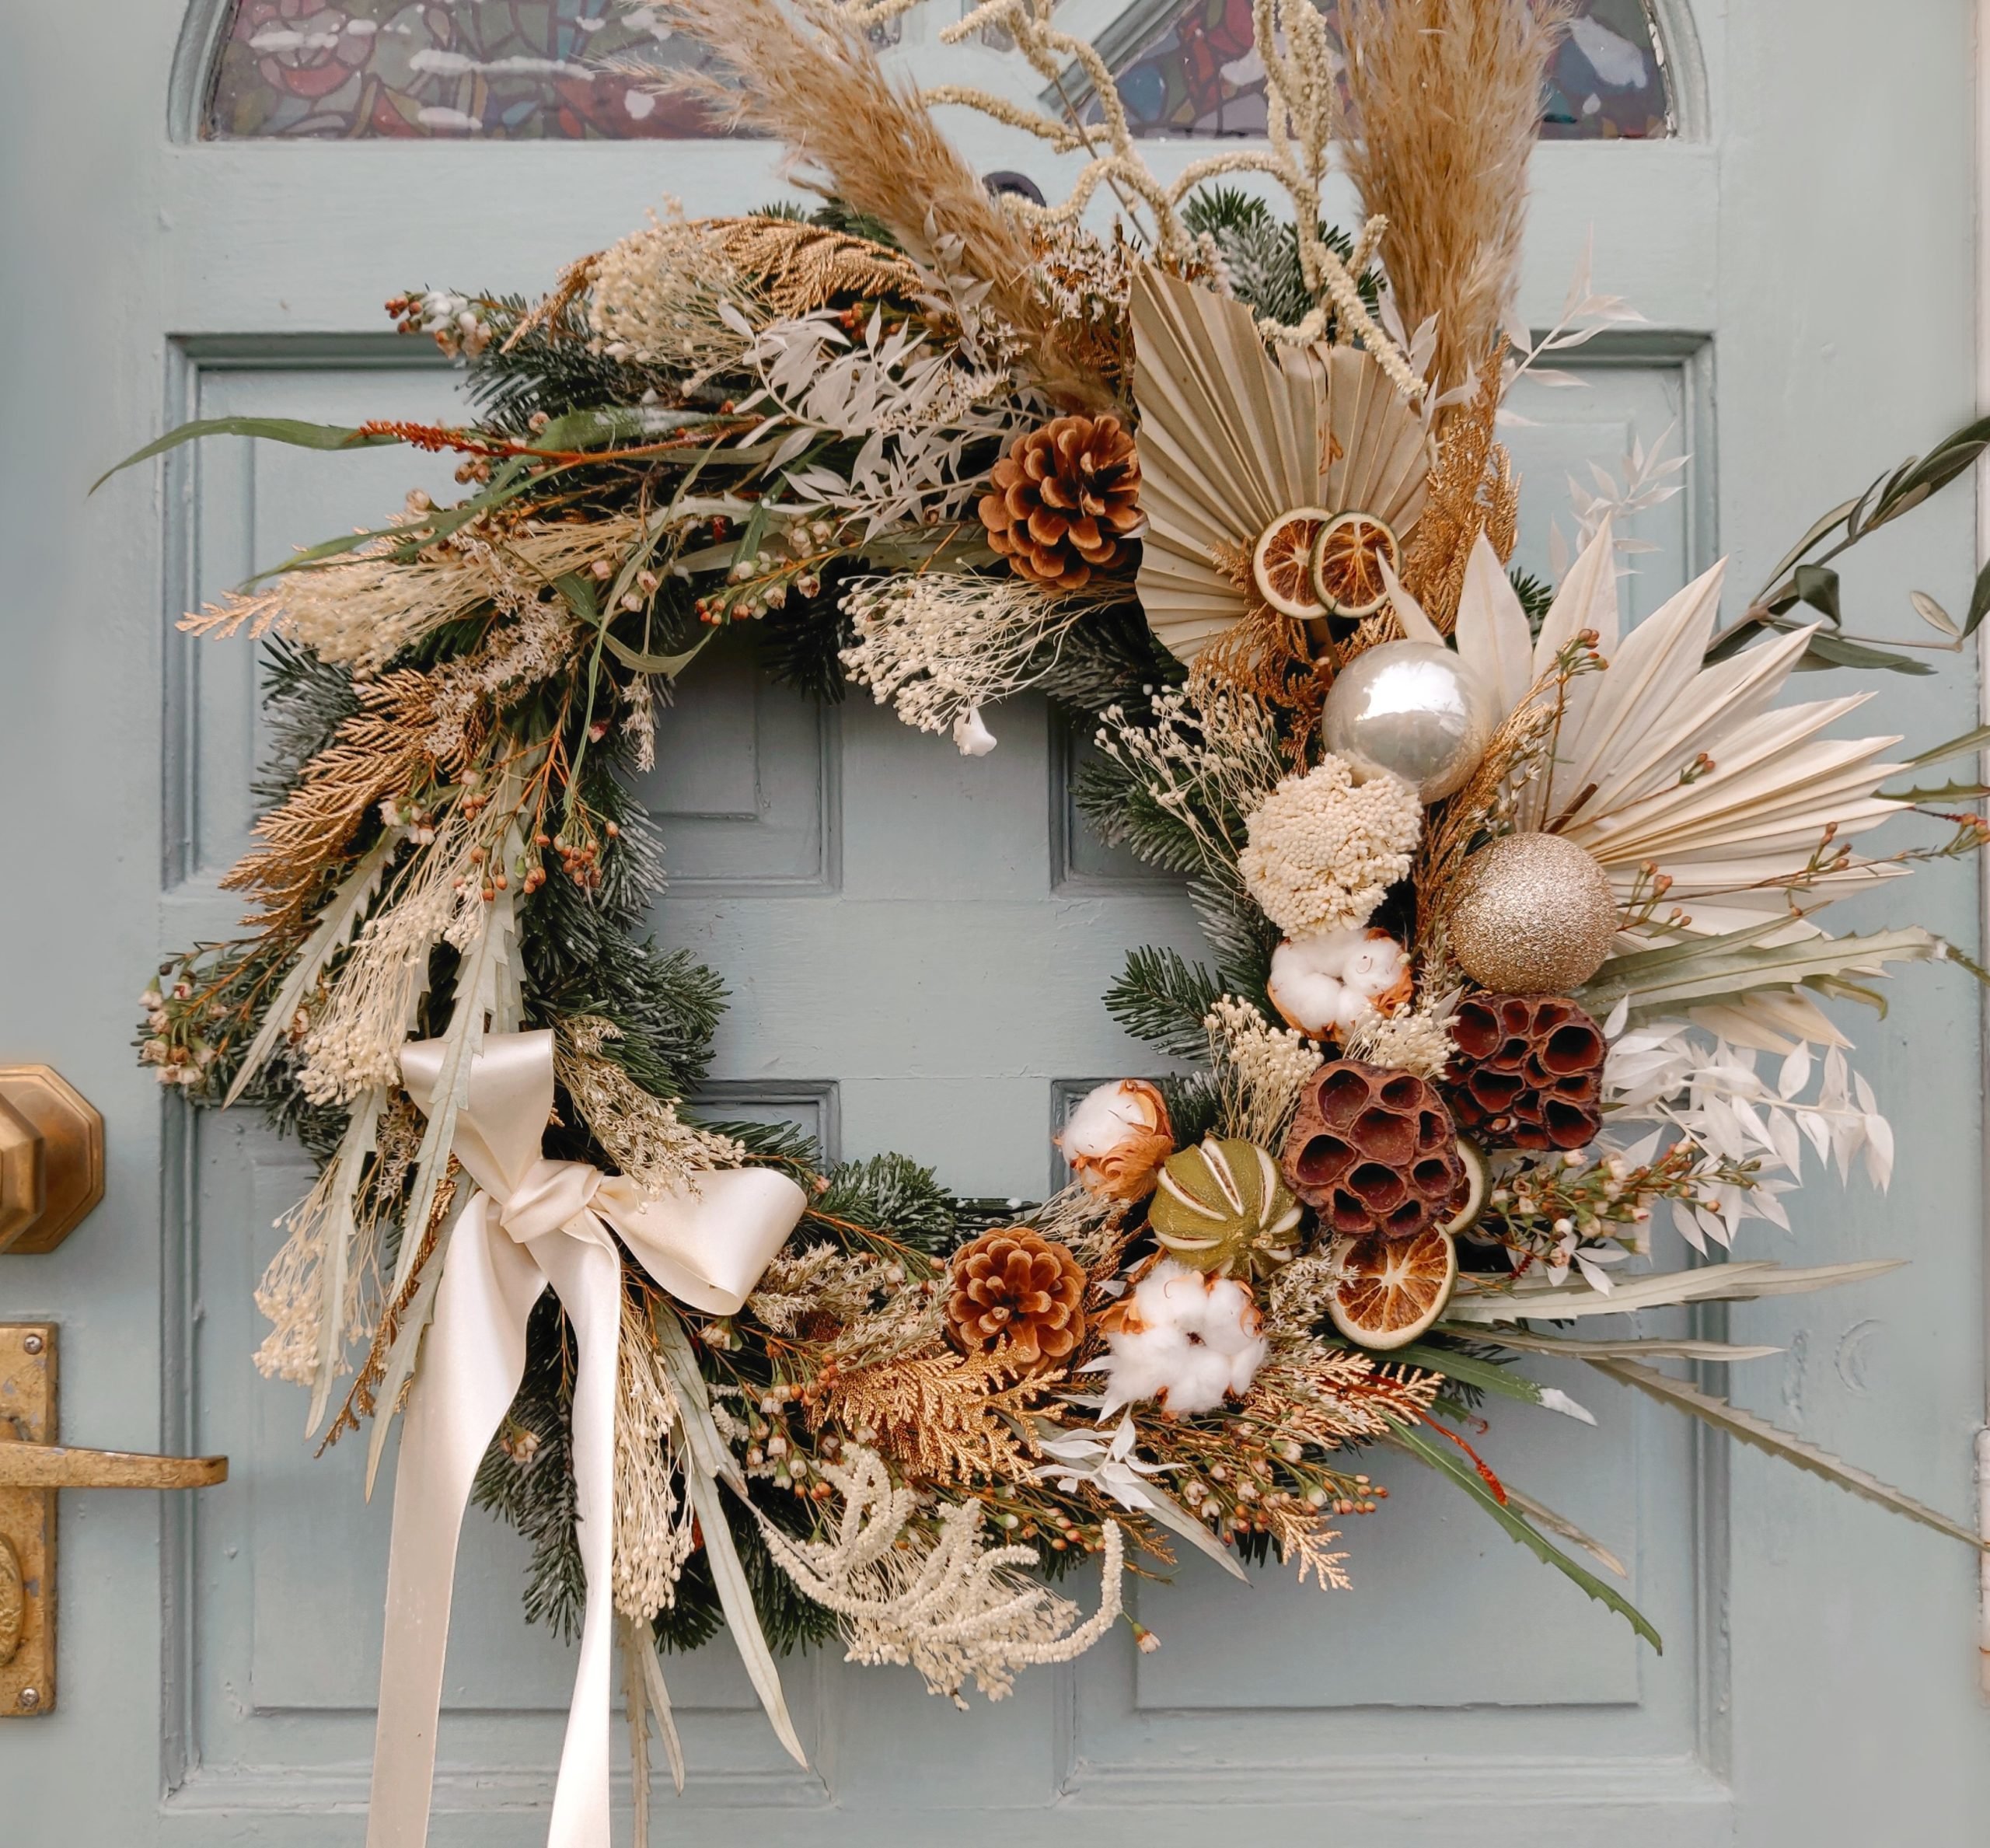 Luxury Christmas Wreath Making With Floral & Lace @ Humber Street Gallery